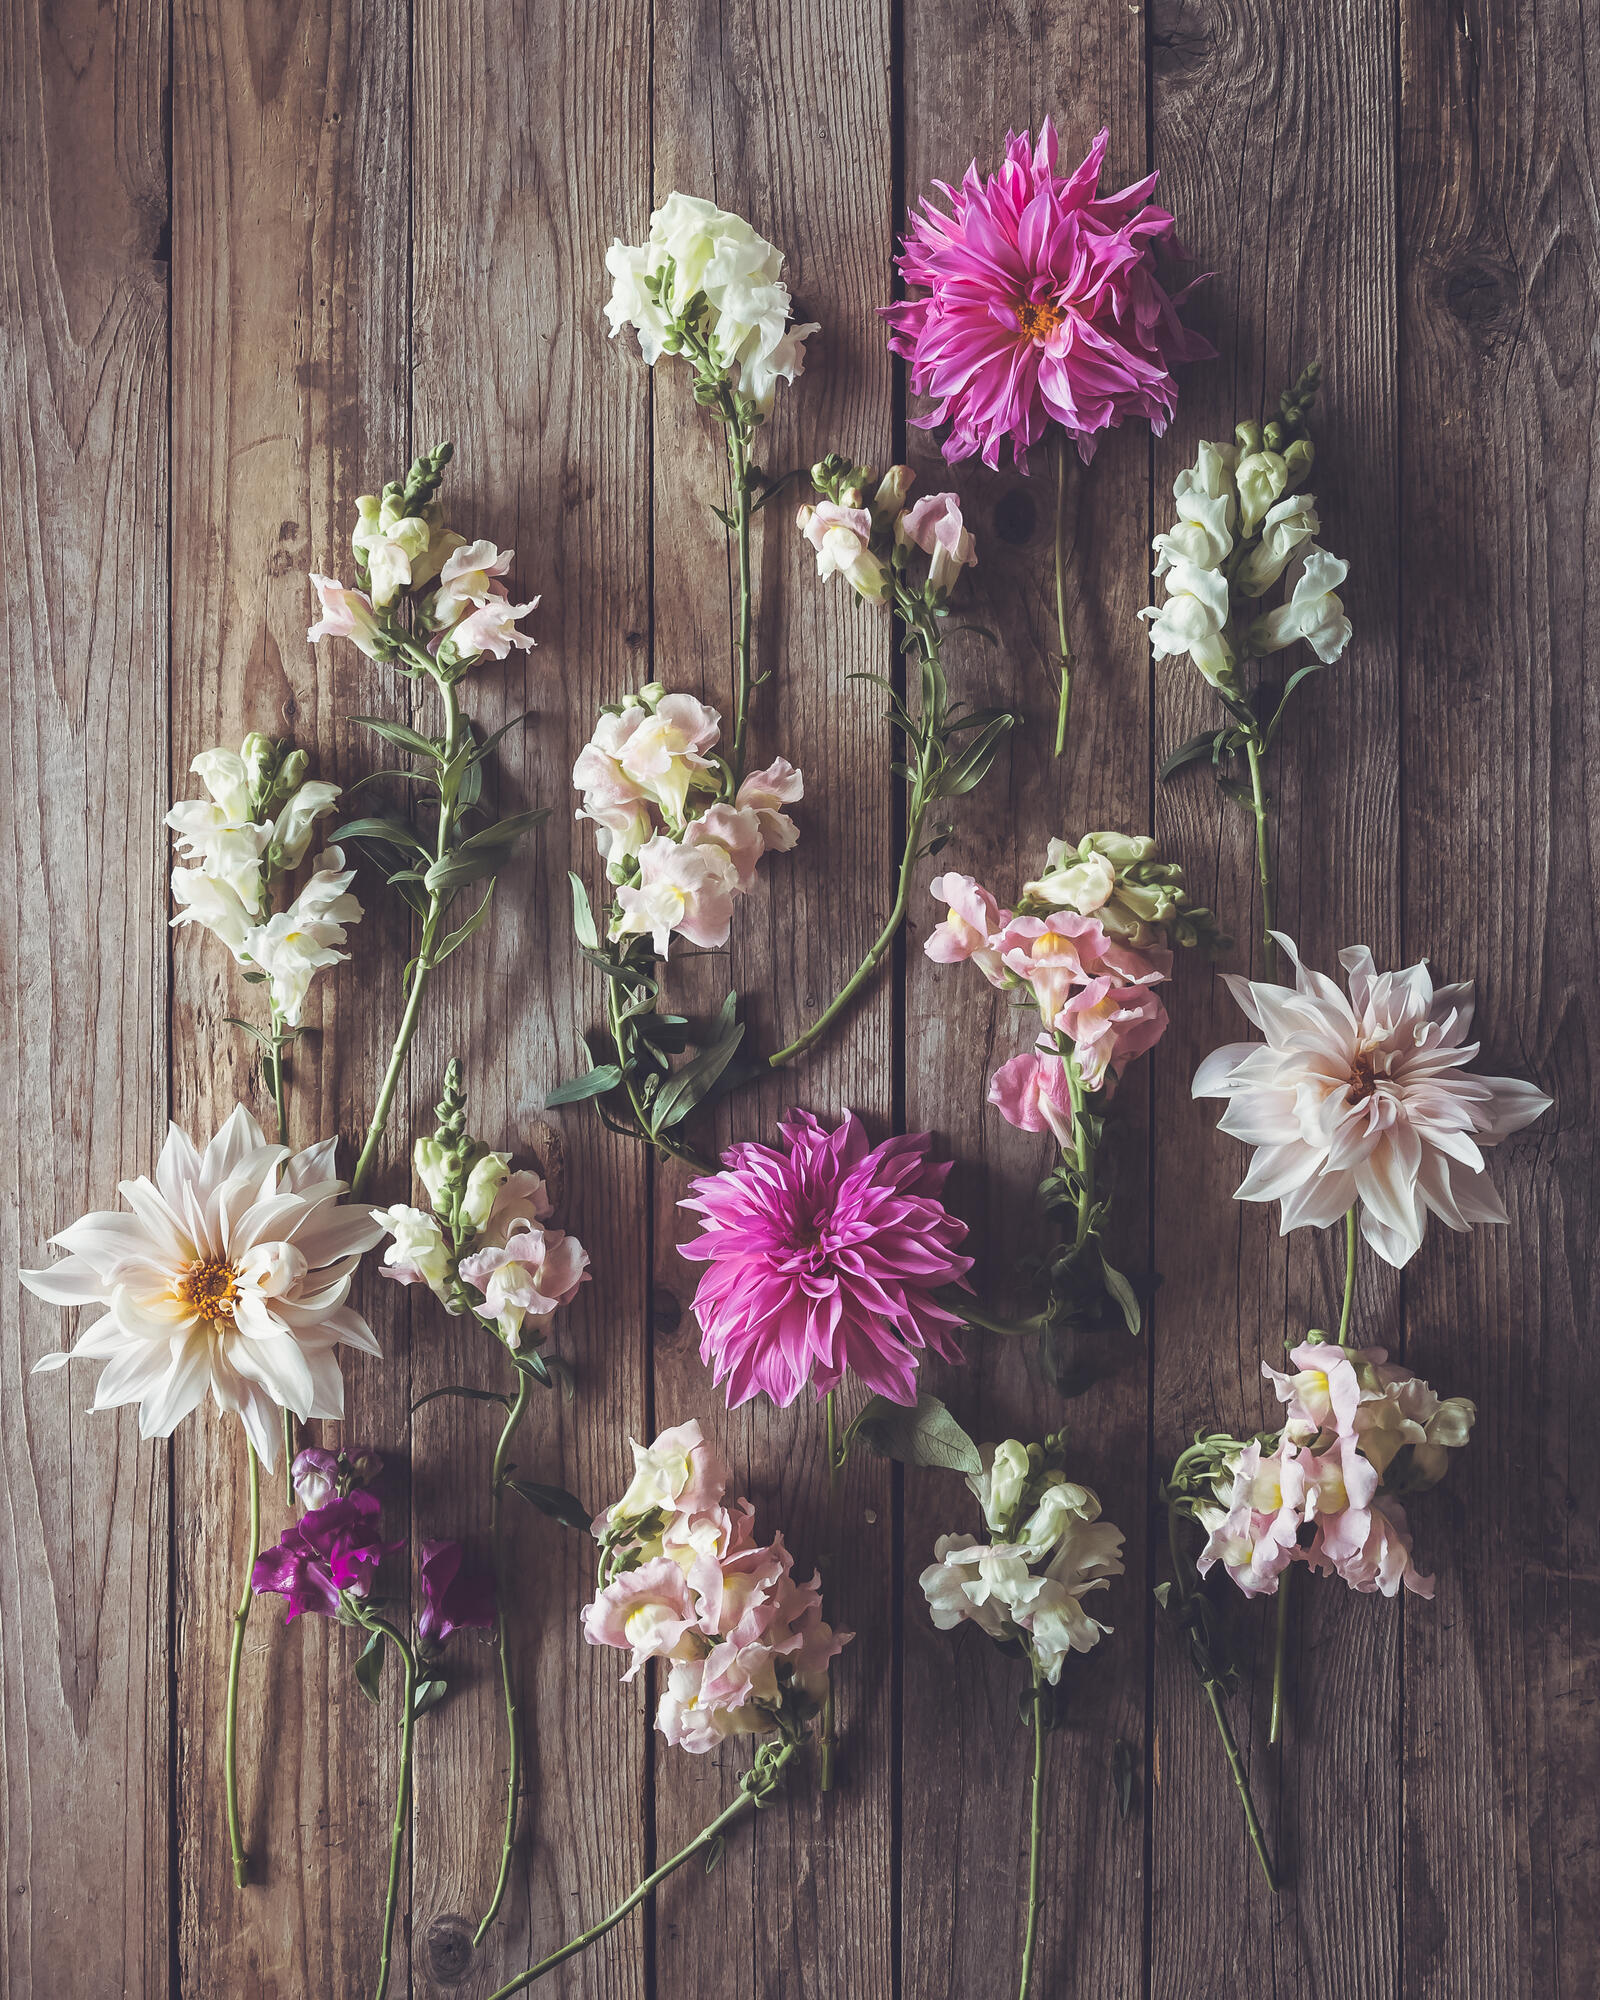 Free photo Flowers arranged on the wooden floor